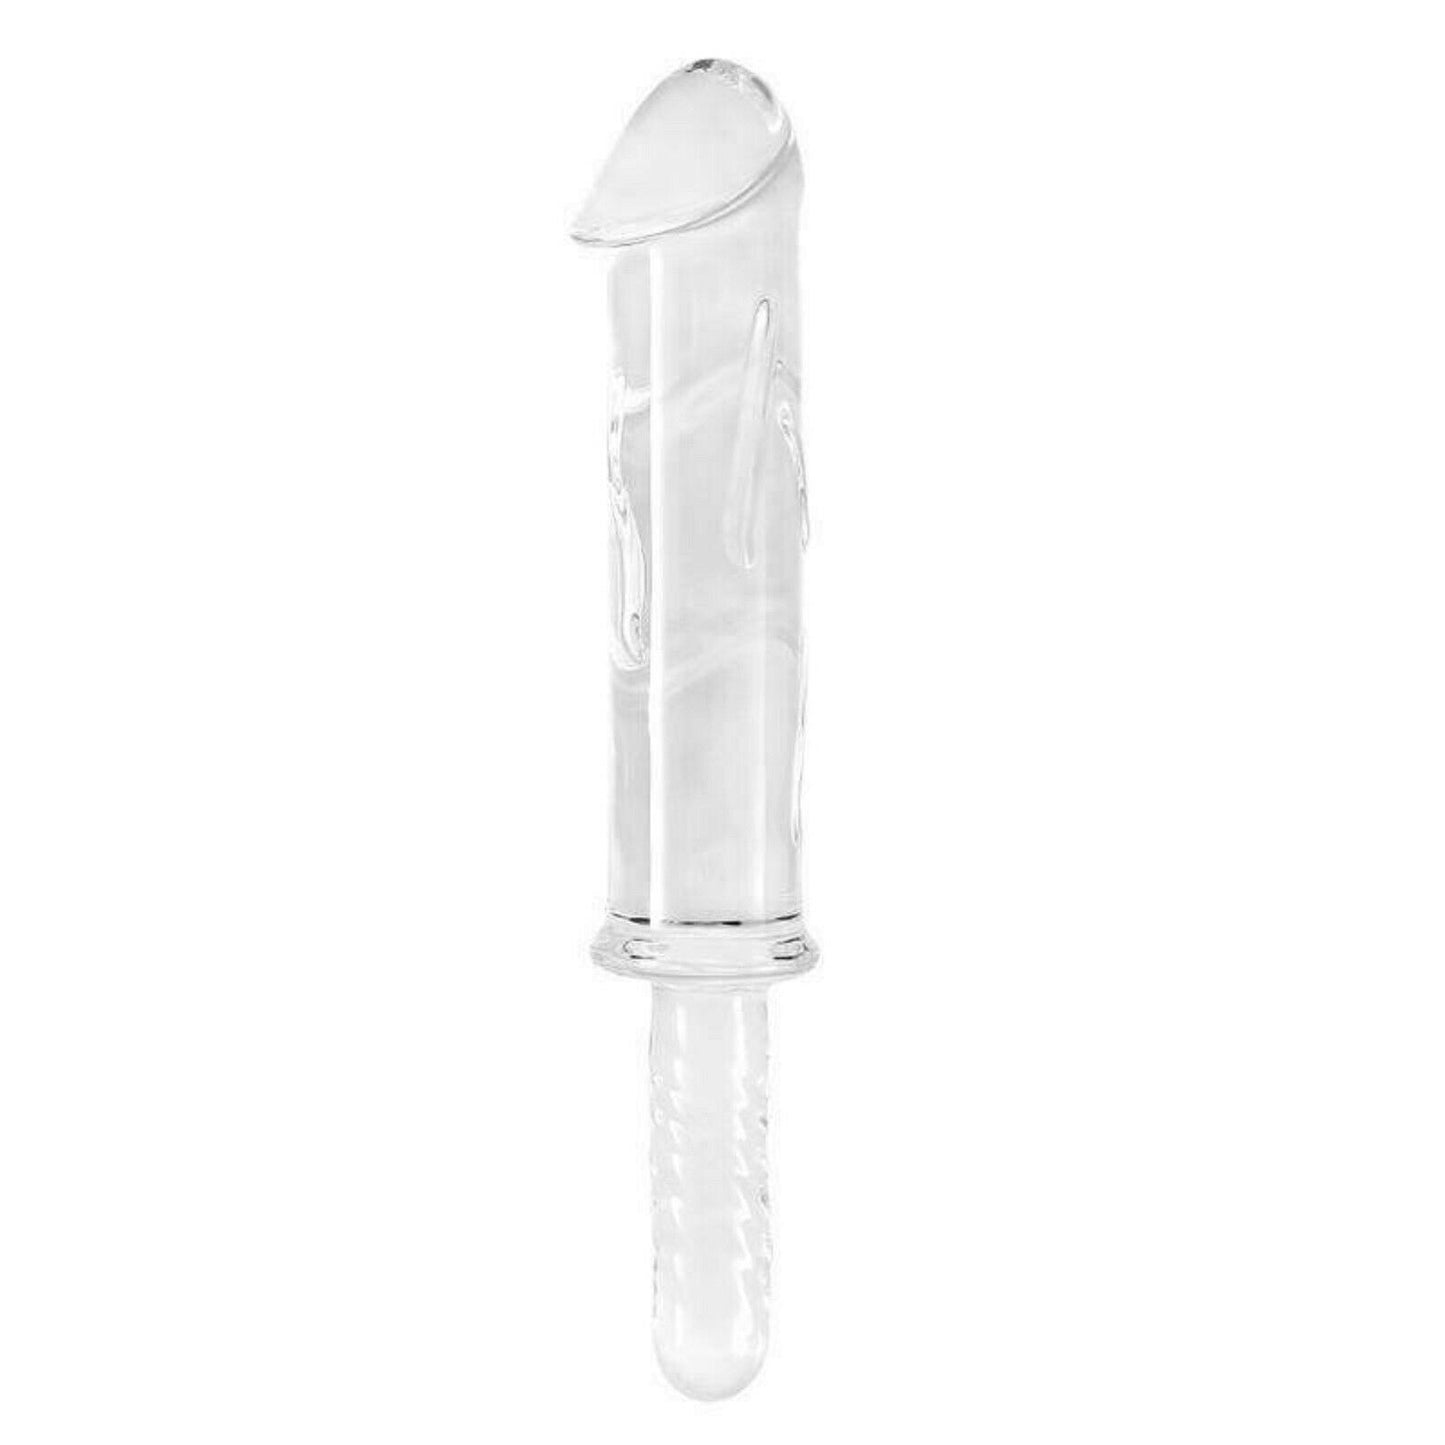 11.2" LARGE Glass Dildo Dong Wand Massager Huge Anal Crystal Thruster XL Sex Toy